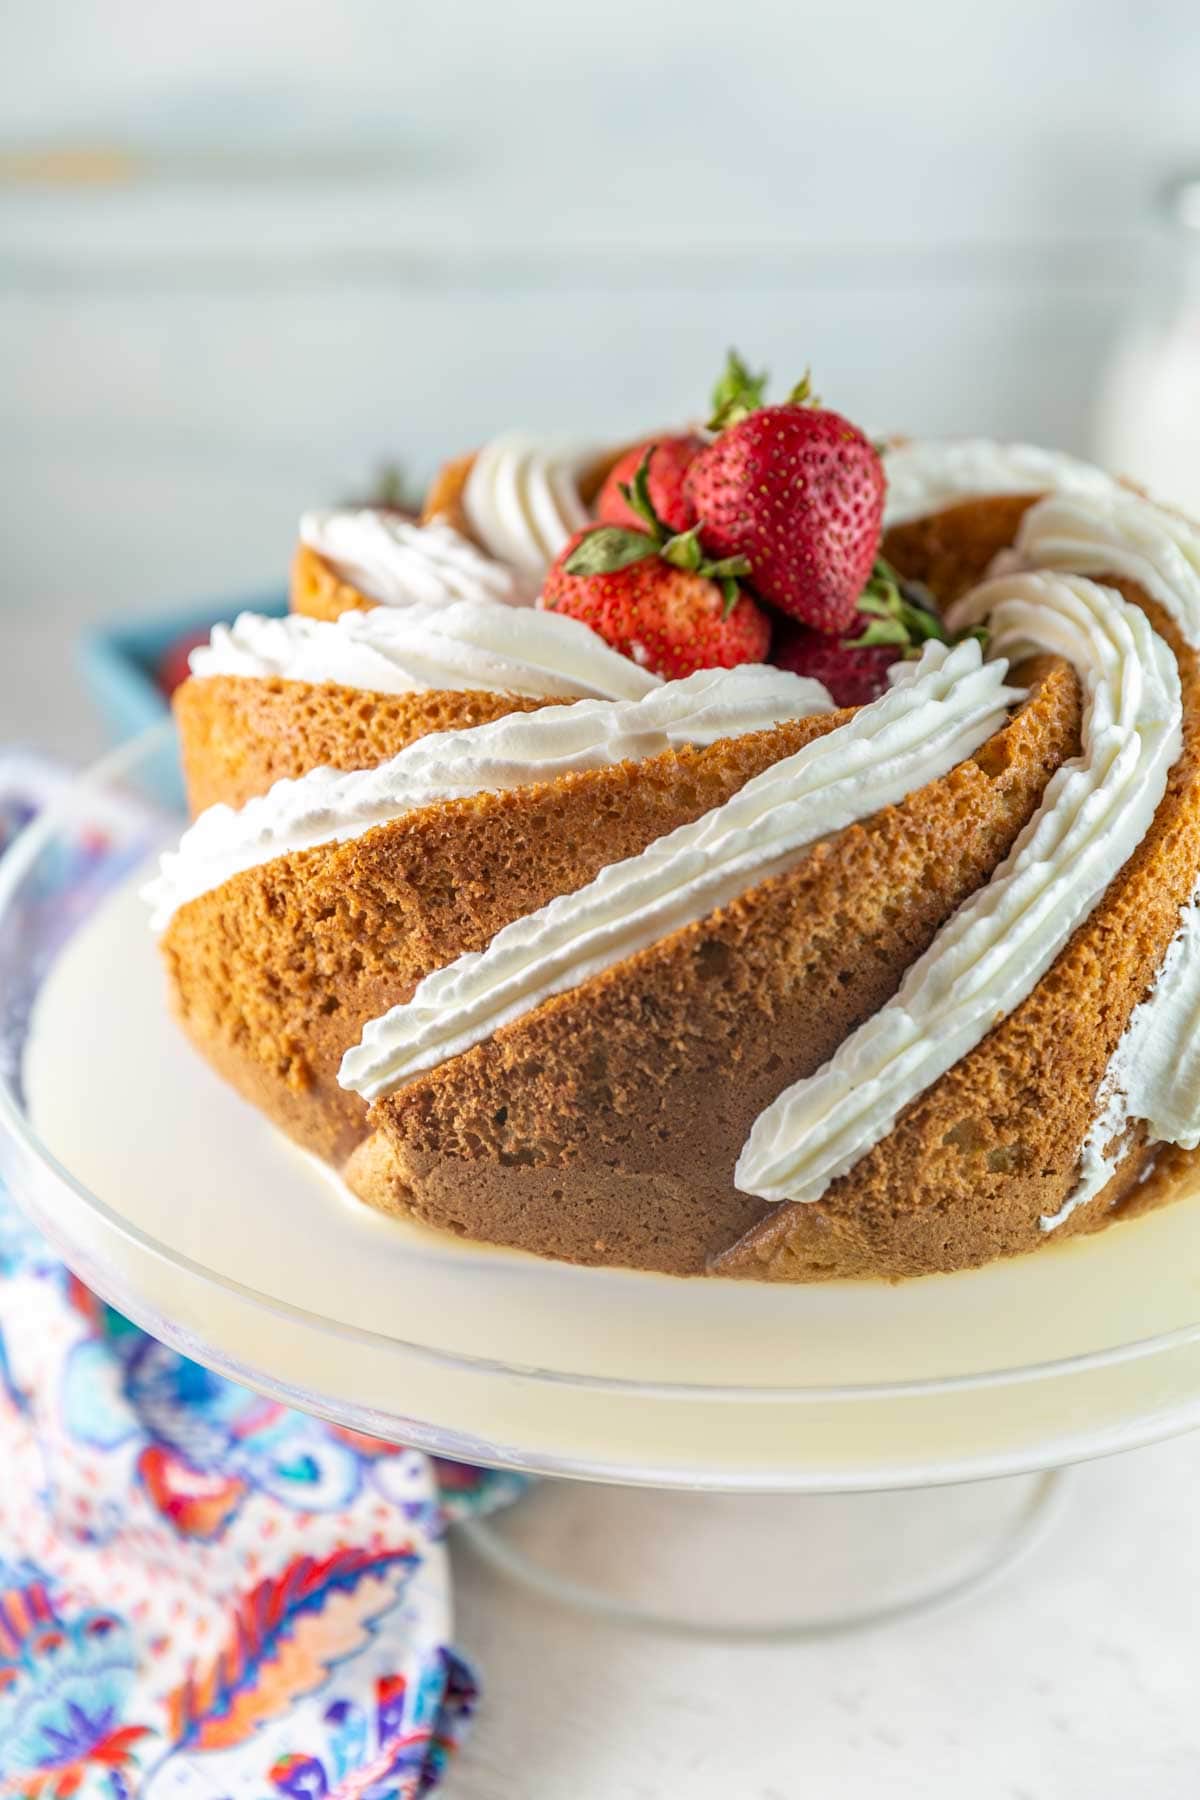 sponge cake baked in a bundt pan soaked in milk and decorated with whipped cream and strawberries